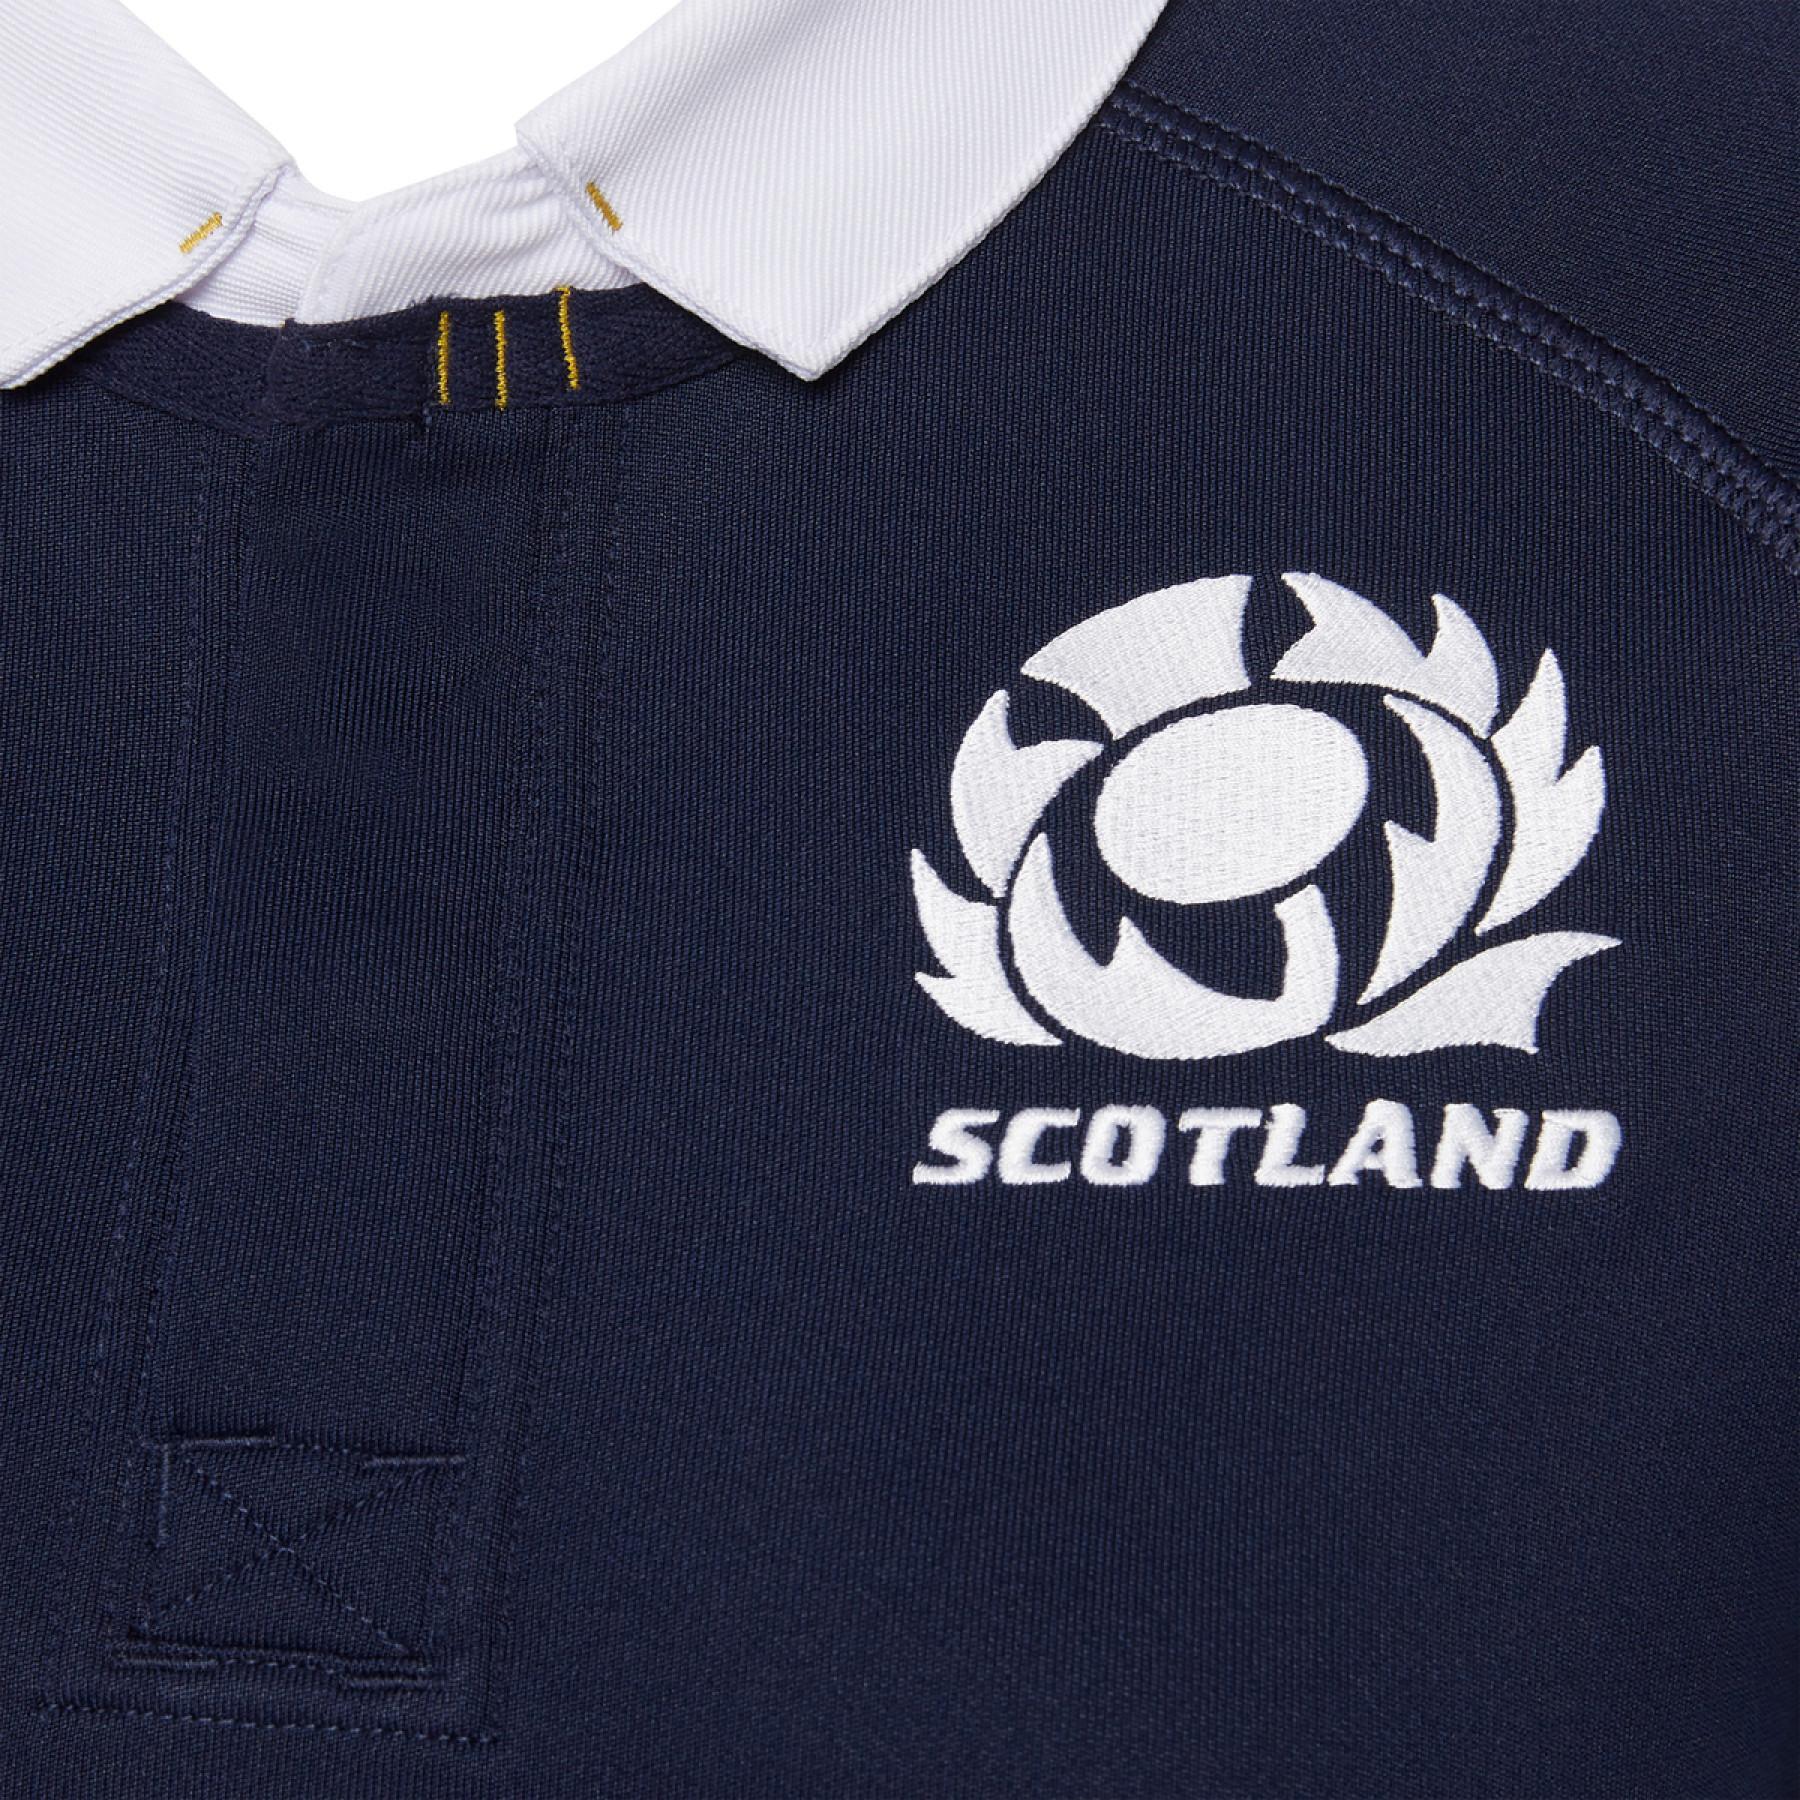 Camisola mulher home Ecosse rugby 2020/21